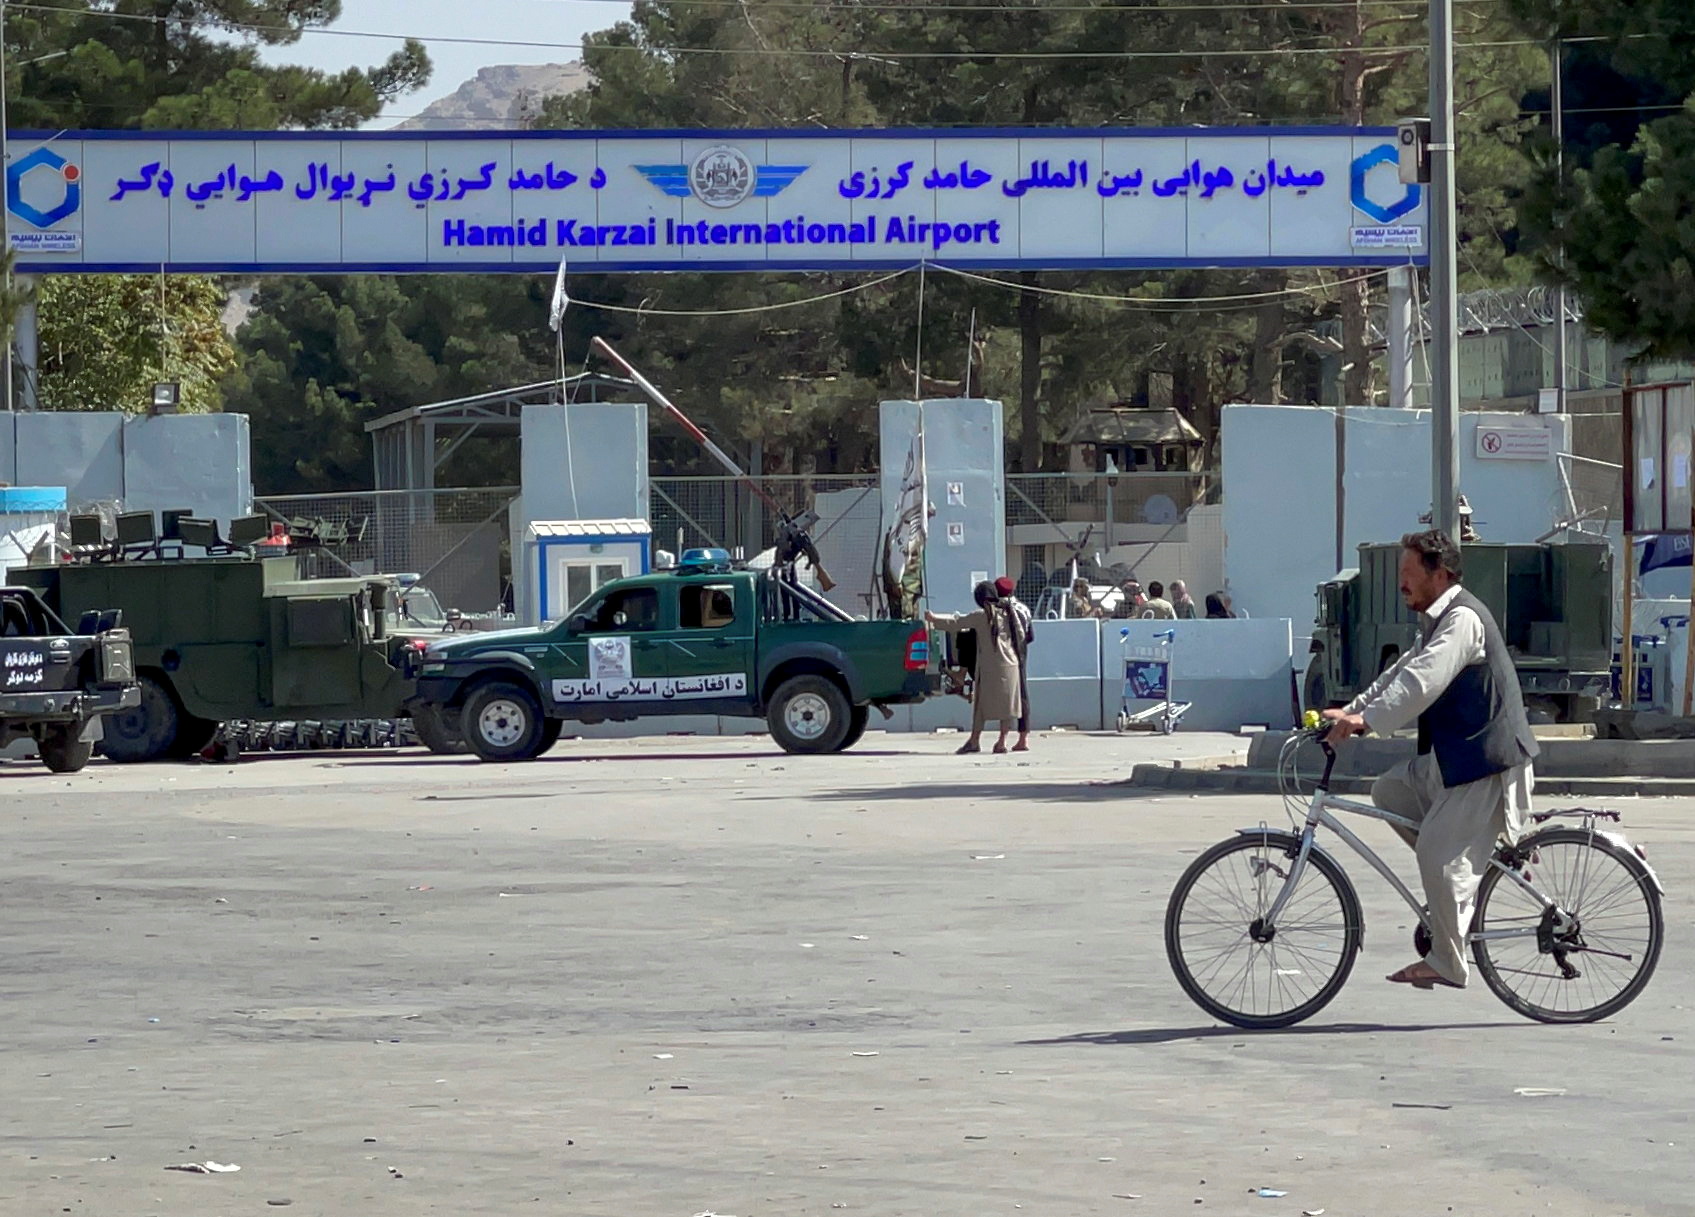 Taliban stand at the entrance gate of Hamid Karzai International airport while Taliban forces block the roads around the airport after yesterday's explosions in Kabul